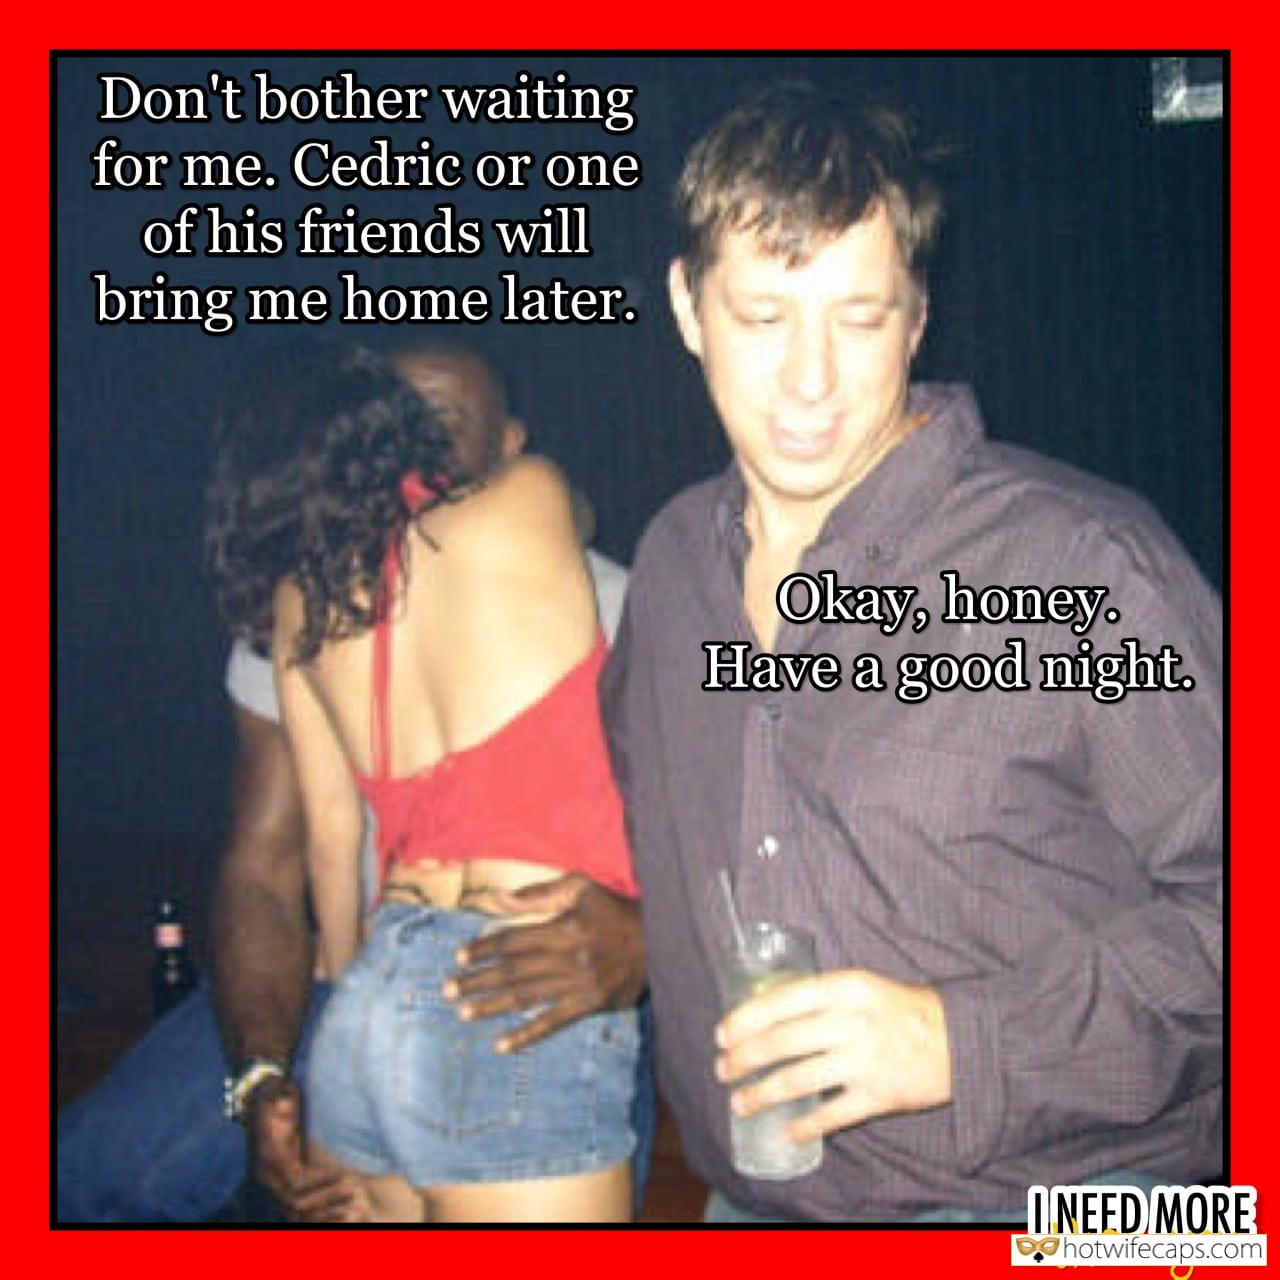 My Favorite hotwife caption: Don’t bother waiting for me. Cedric or one of his friends will bring me home later. Okay, honey. Have a good night. ONEED MORE trian you Husband Leaves Her Wife to Get Fucked